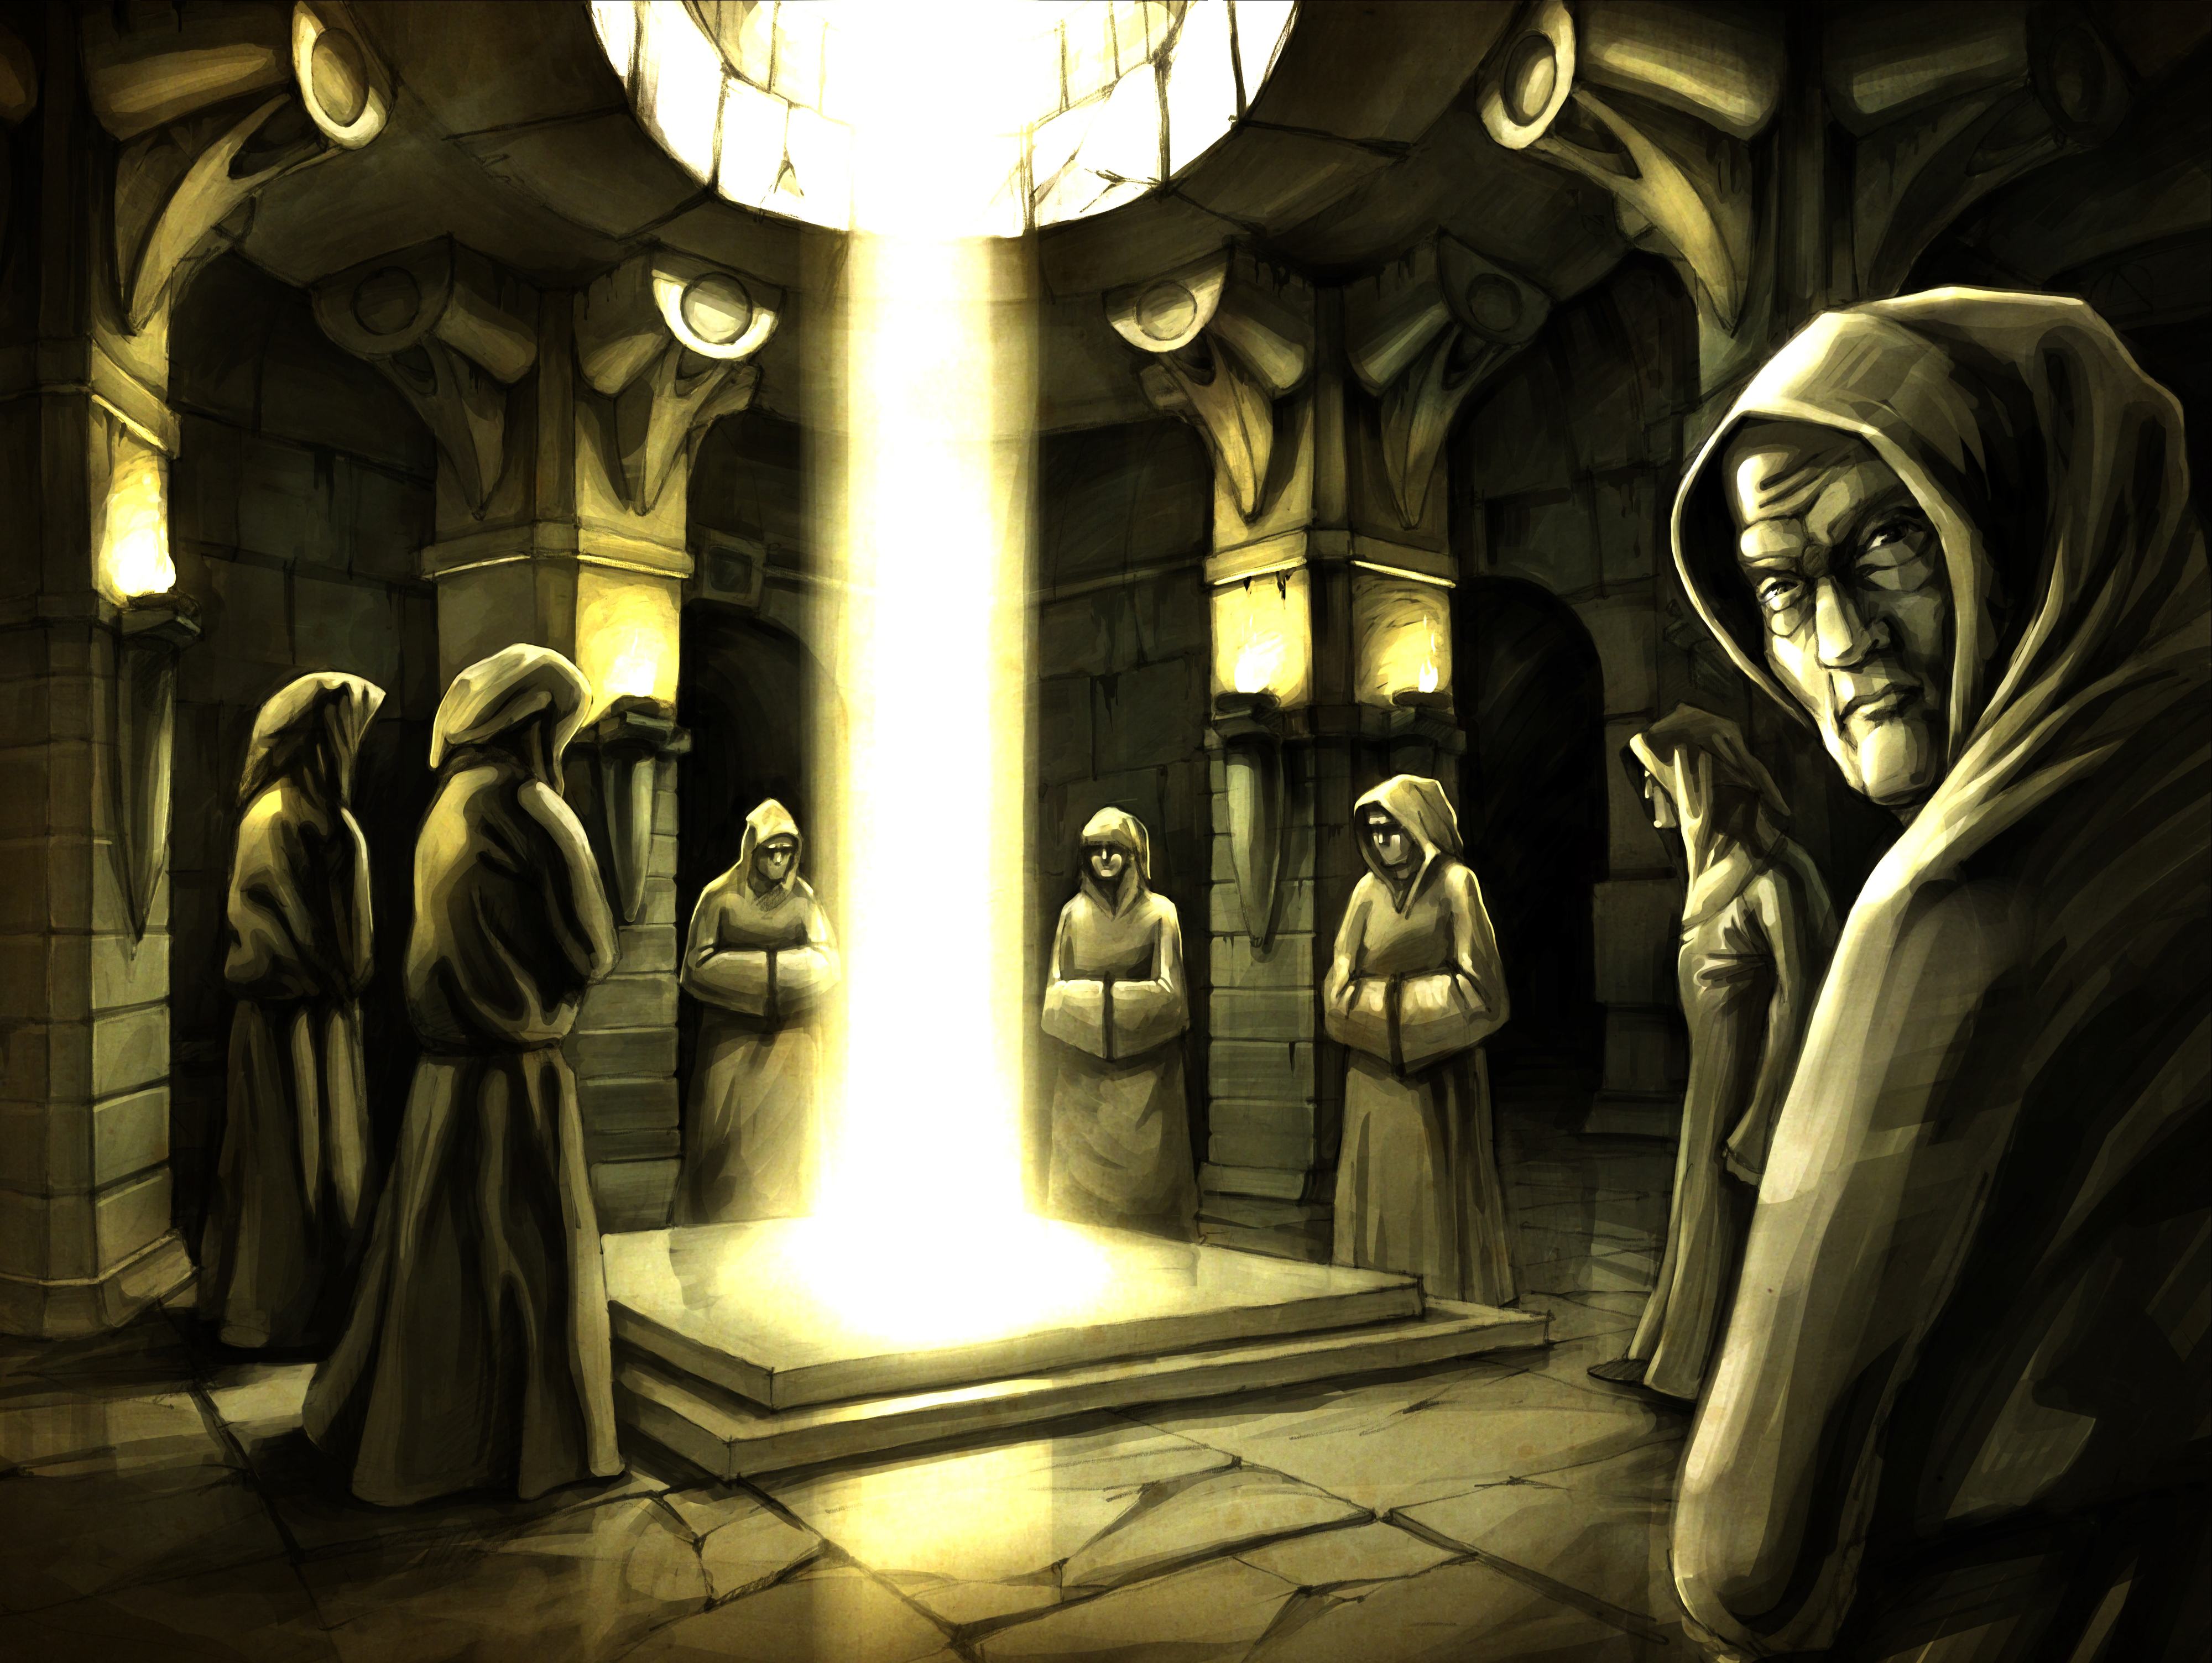 Illustration of animated characters resembling monks, gathered around a light beam in a dimly lit, arched room